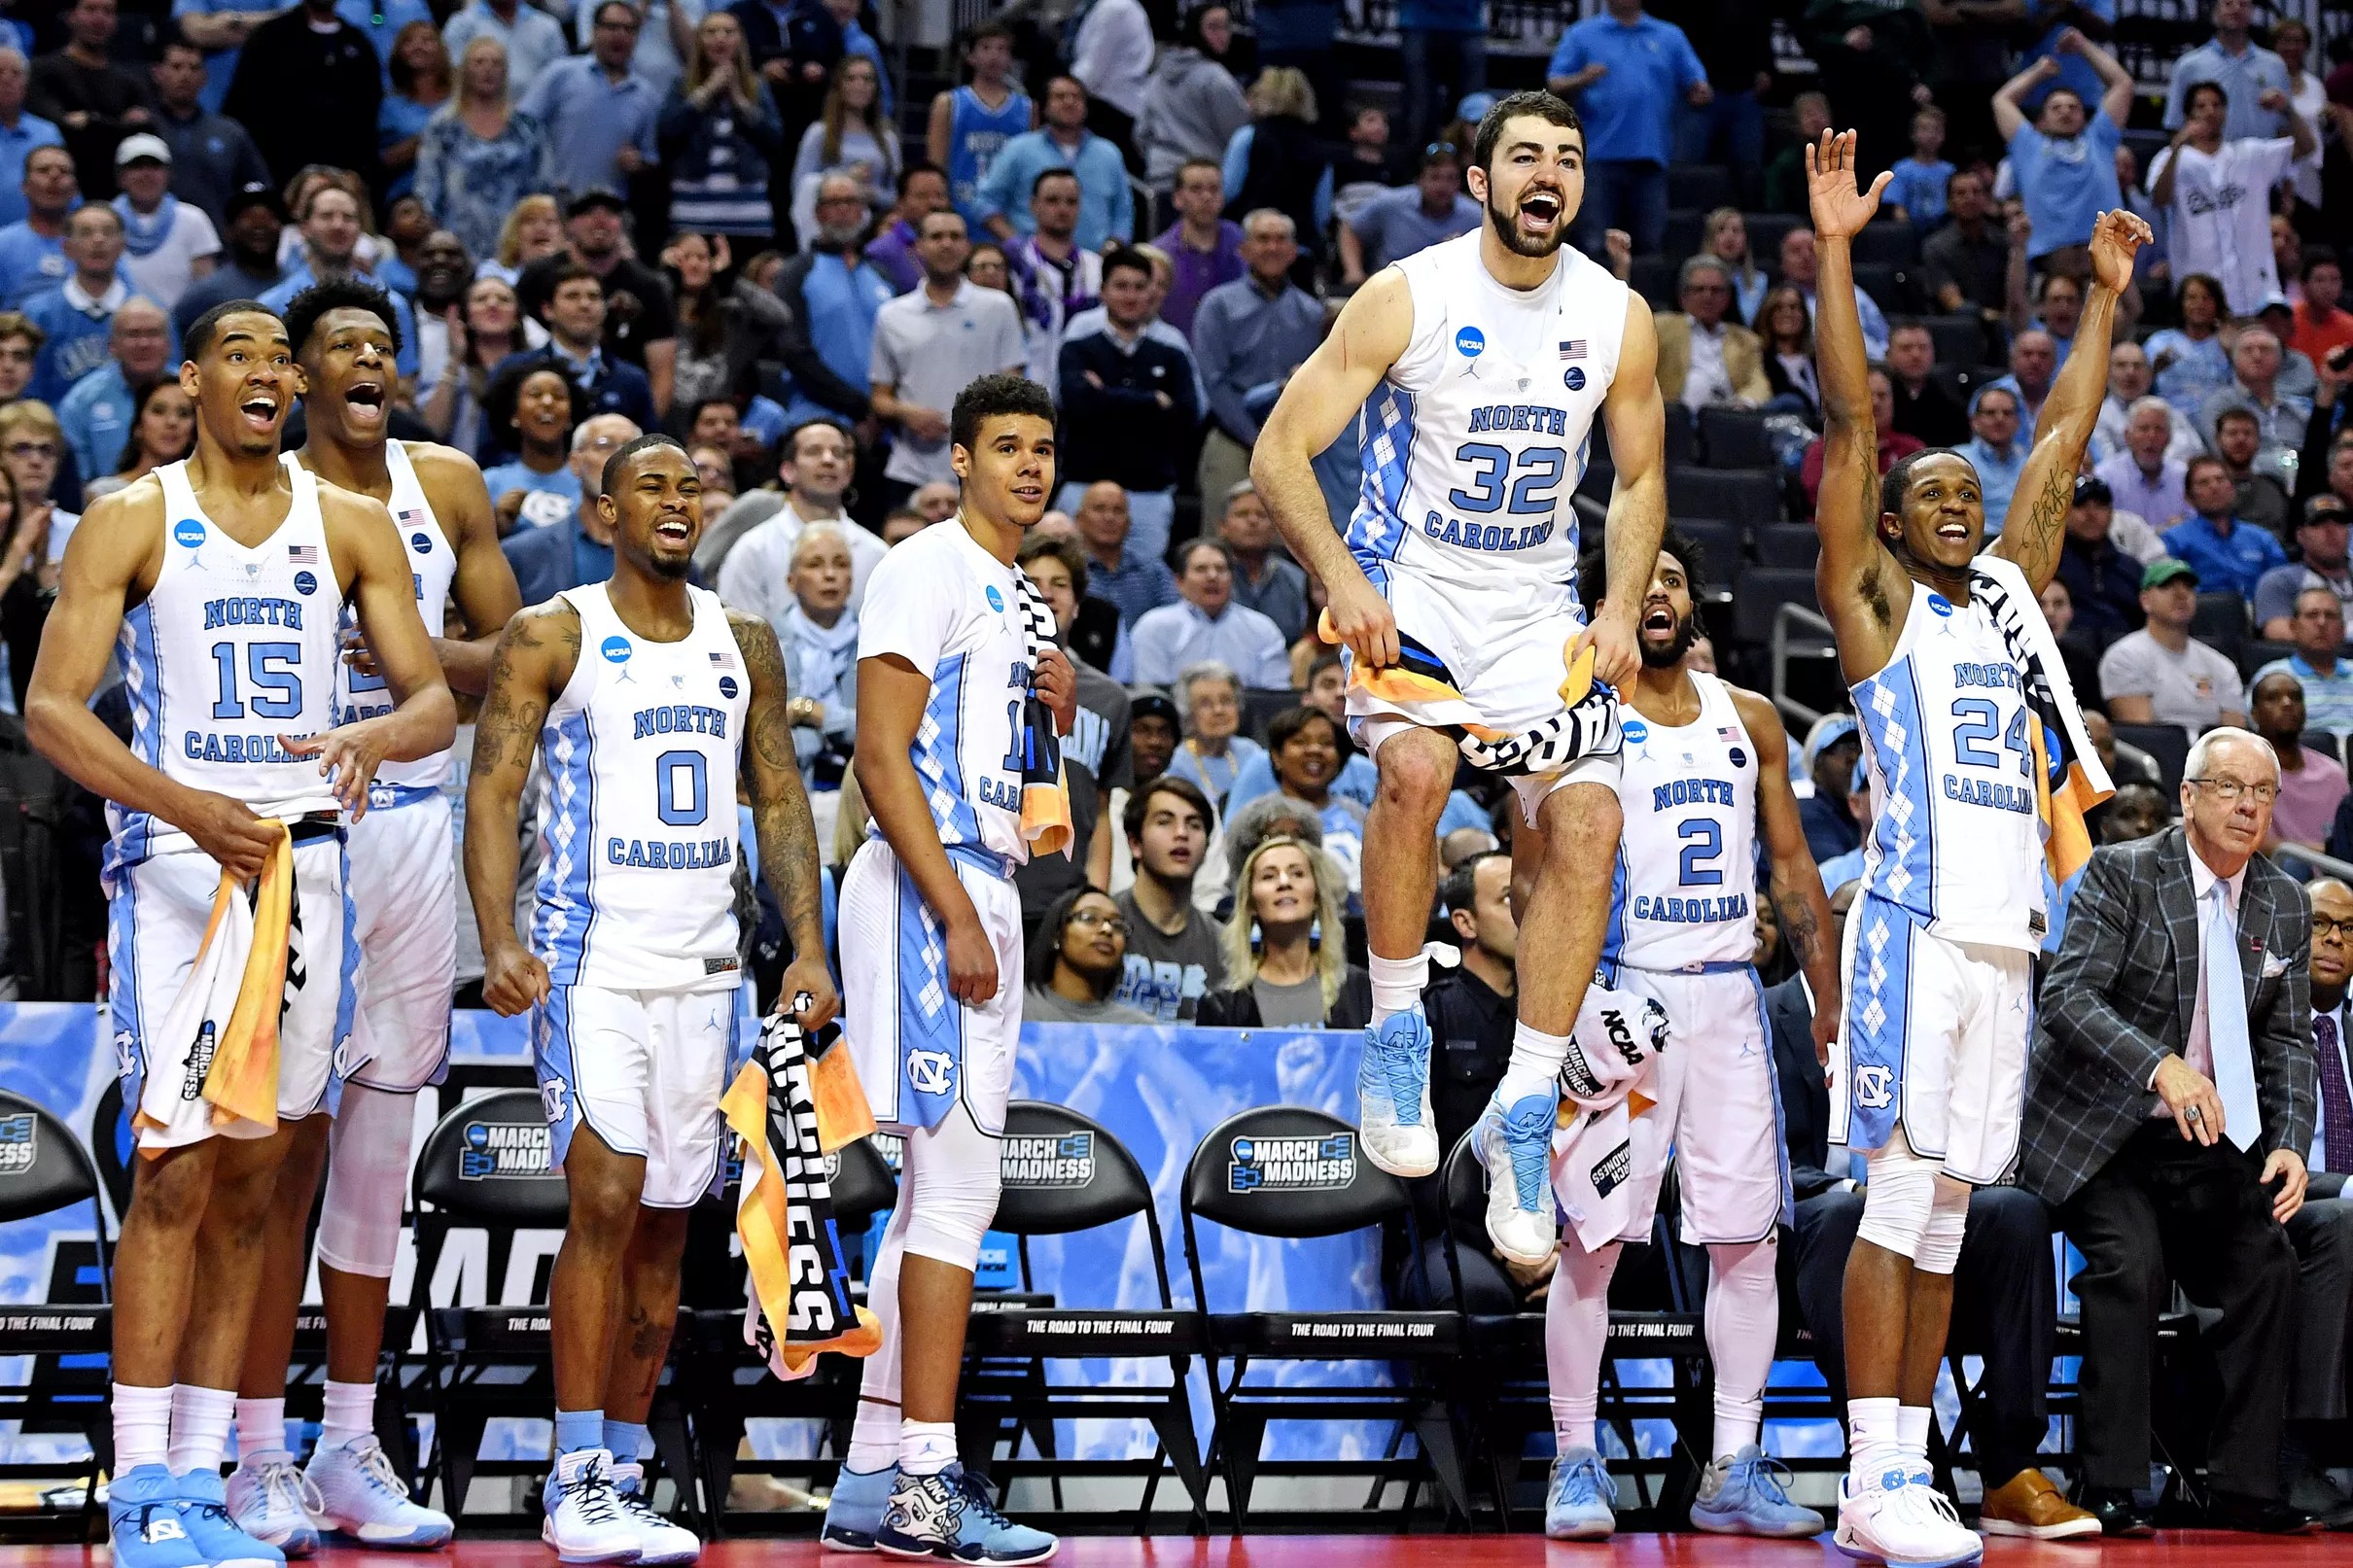 UNC Basketball NCAA Tournament How to Watch UNC vs. Texas A&M